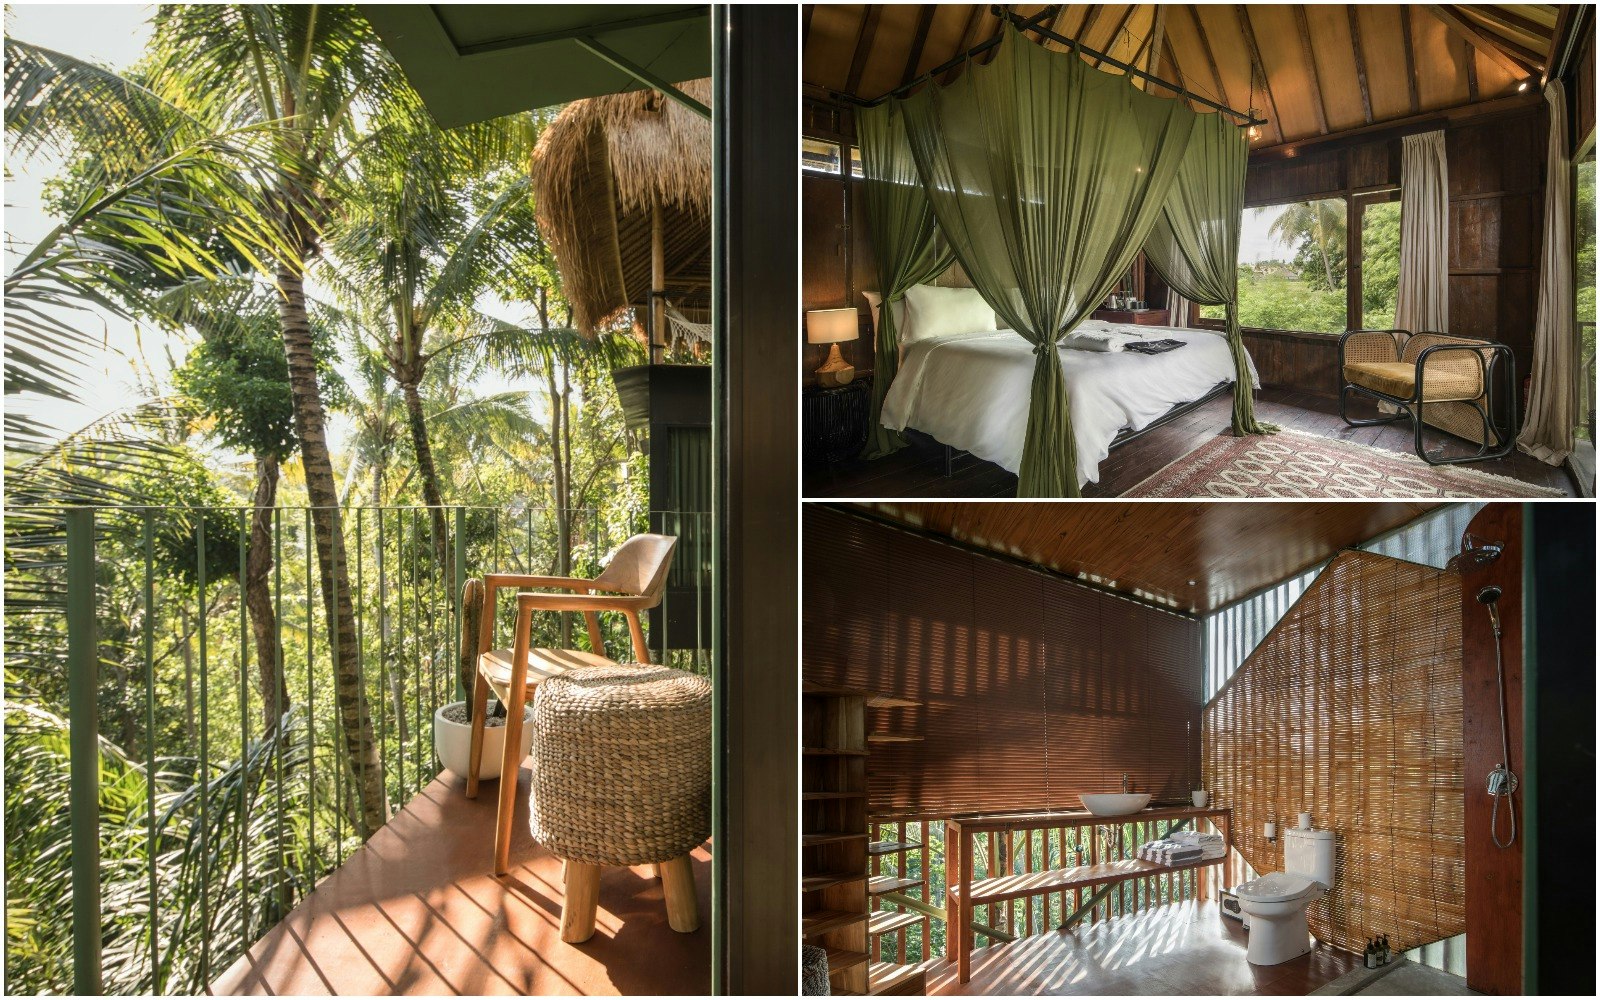 A collage of images from the interior of a treetop lodge in Bali